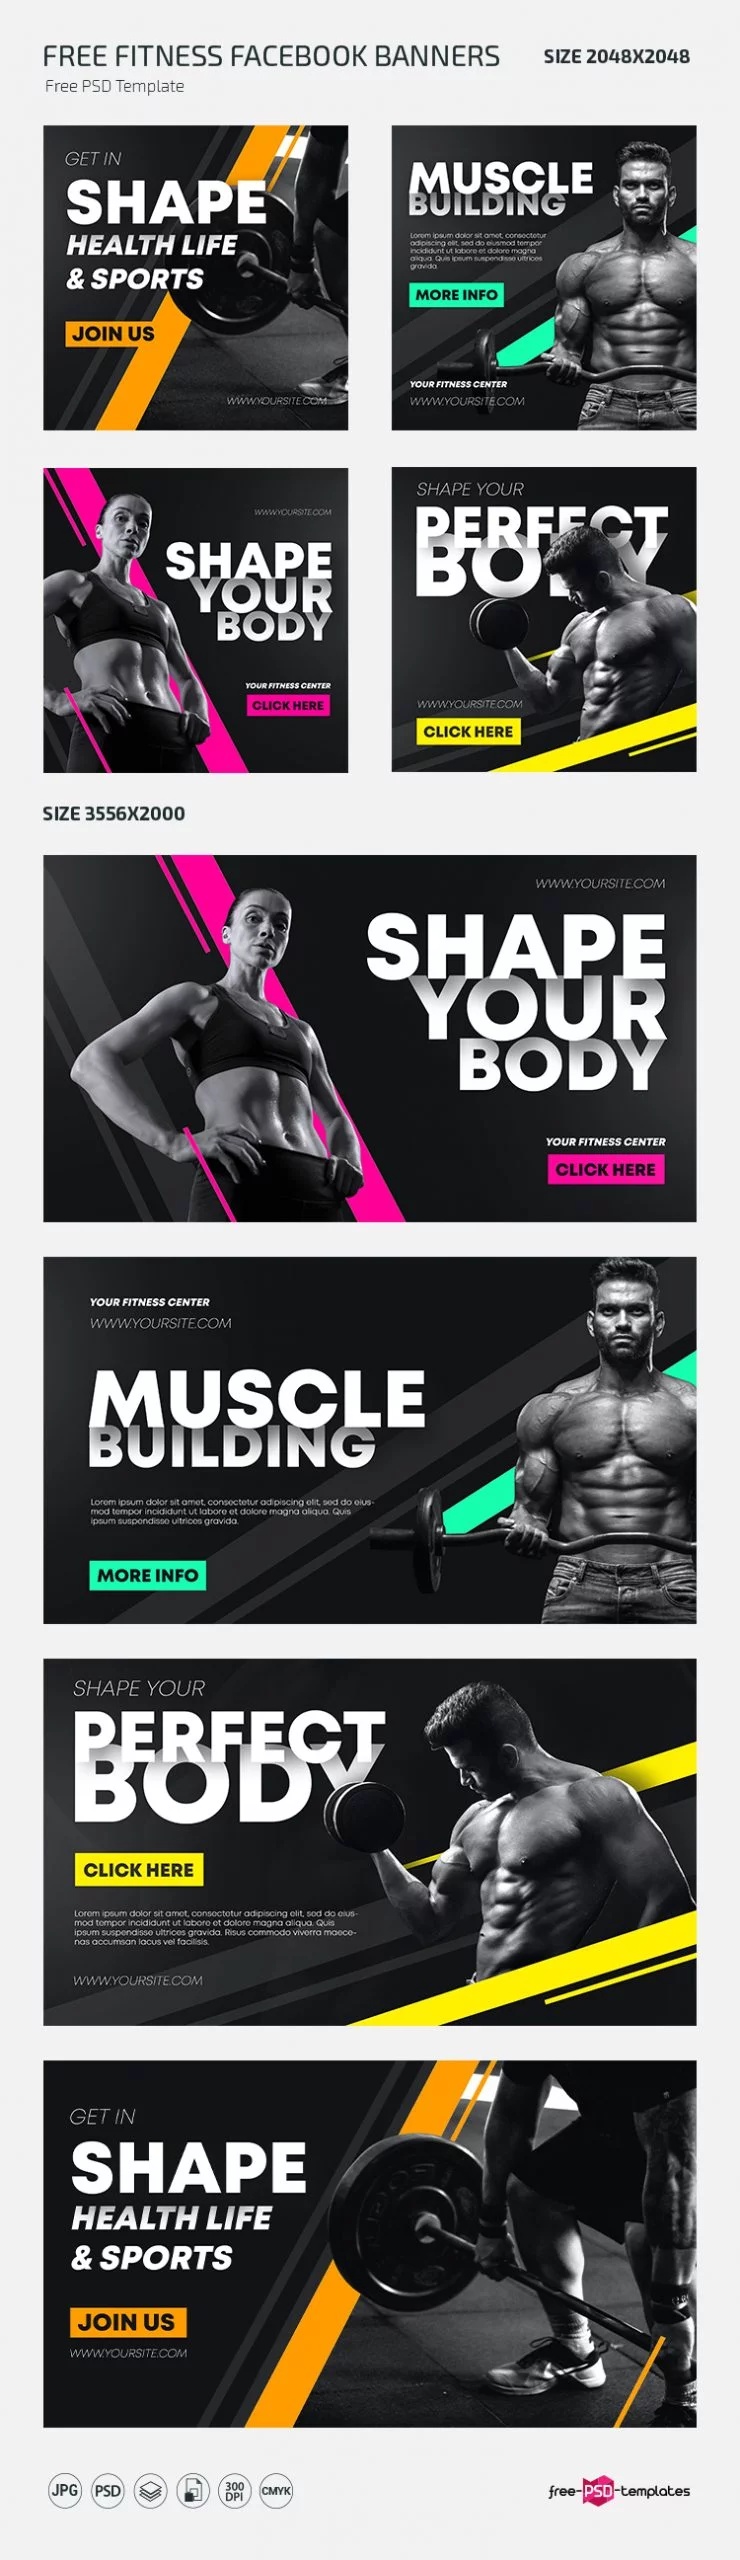 Free Fitness Banners